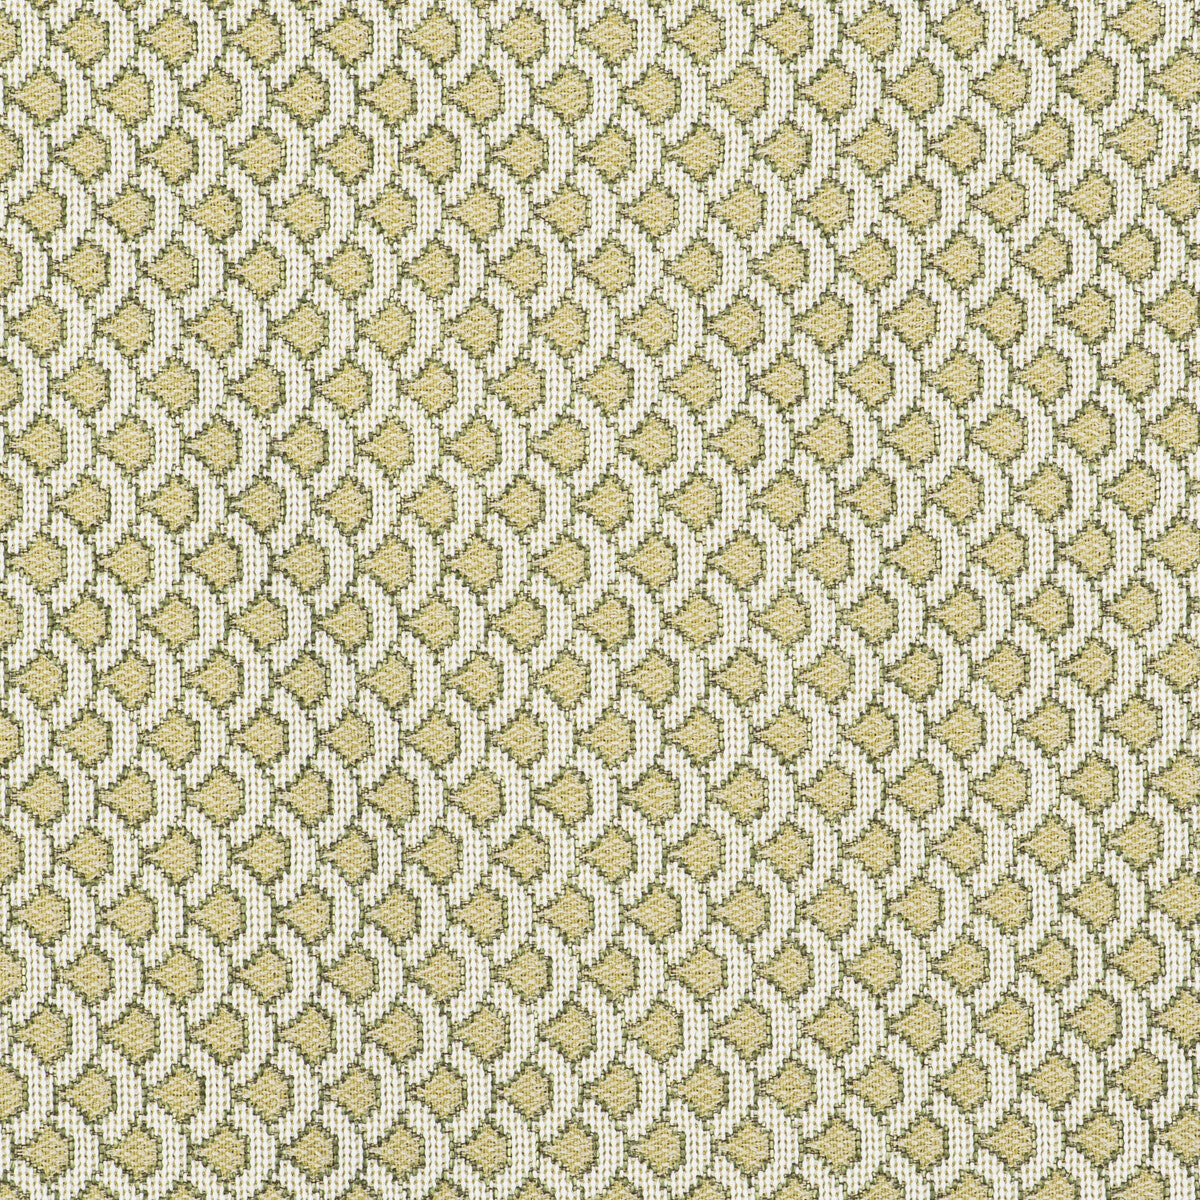 Ondas fabric in verde color - pattern GDT5511.003.0 - by Gaston y Daniela in the Gaston Libreria collection